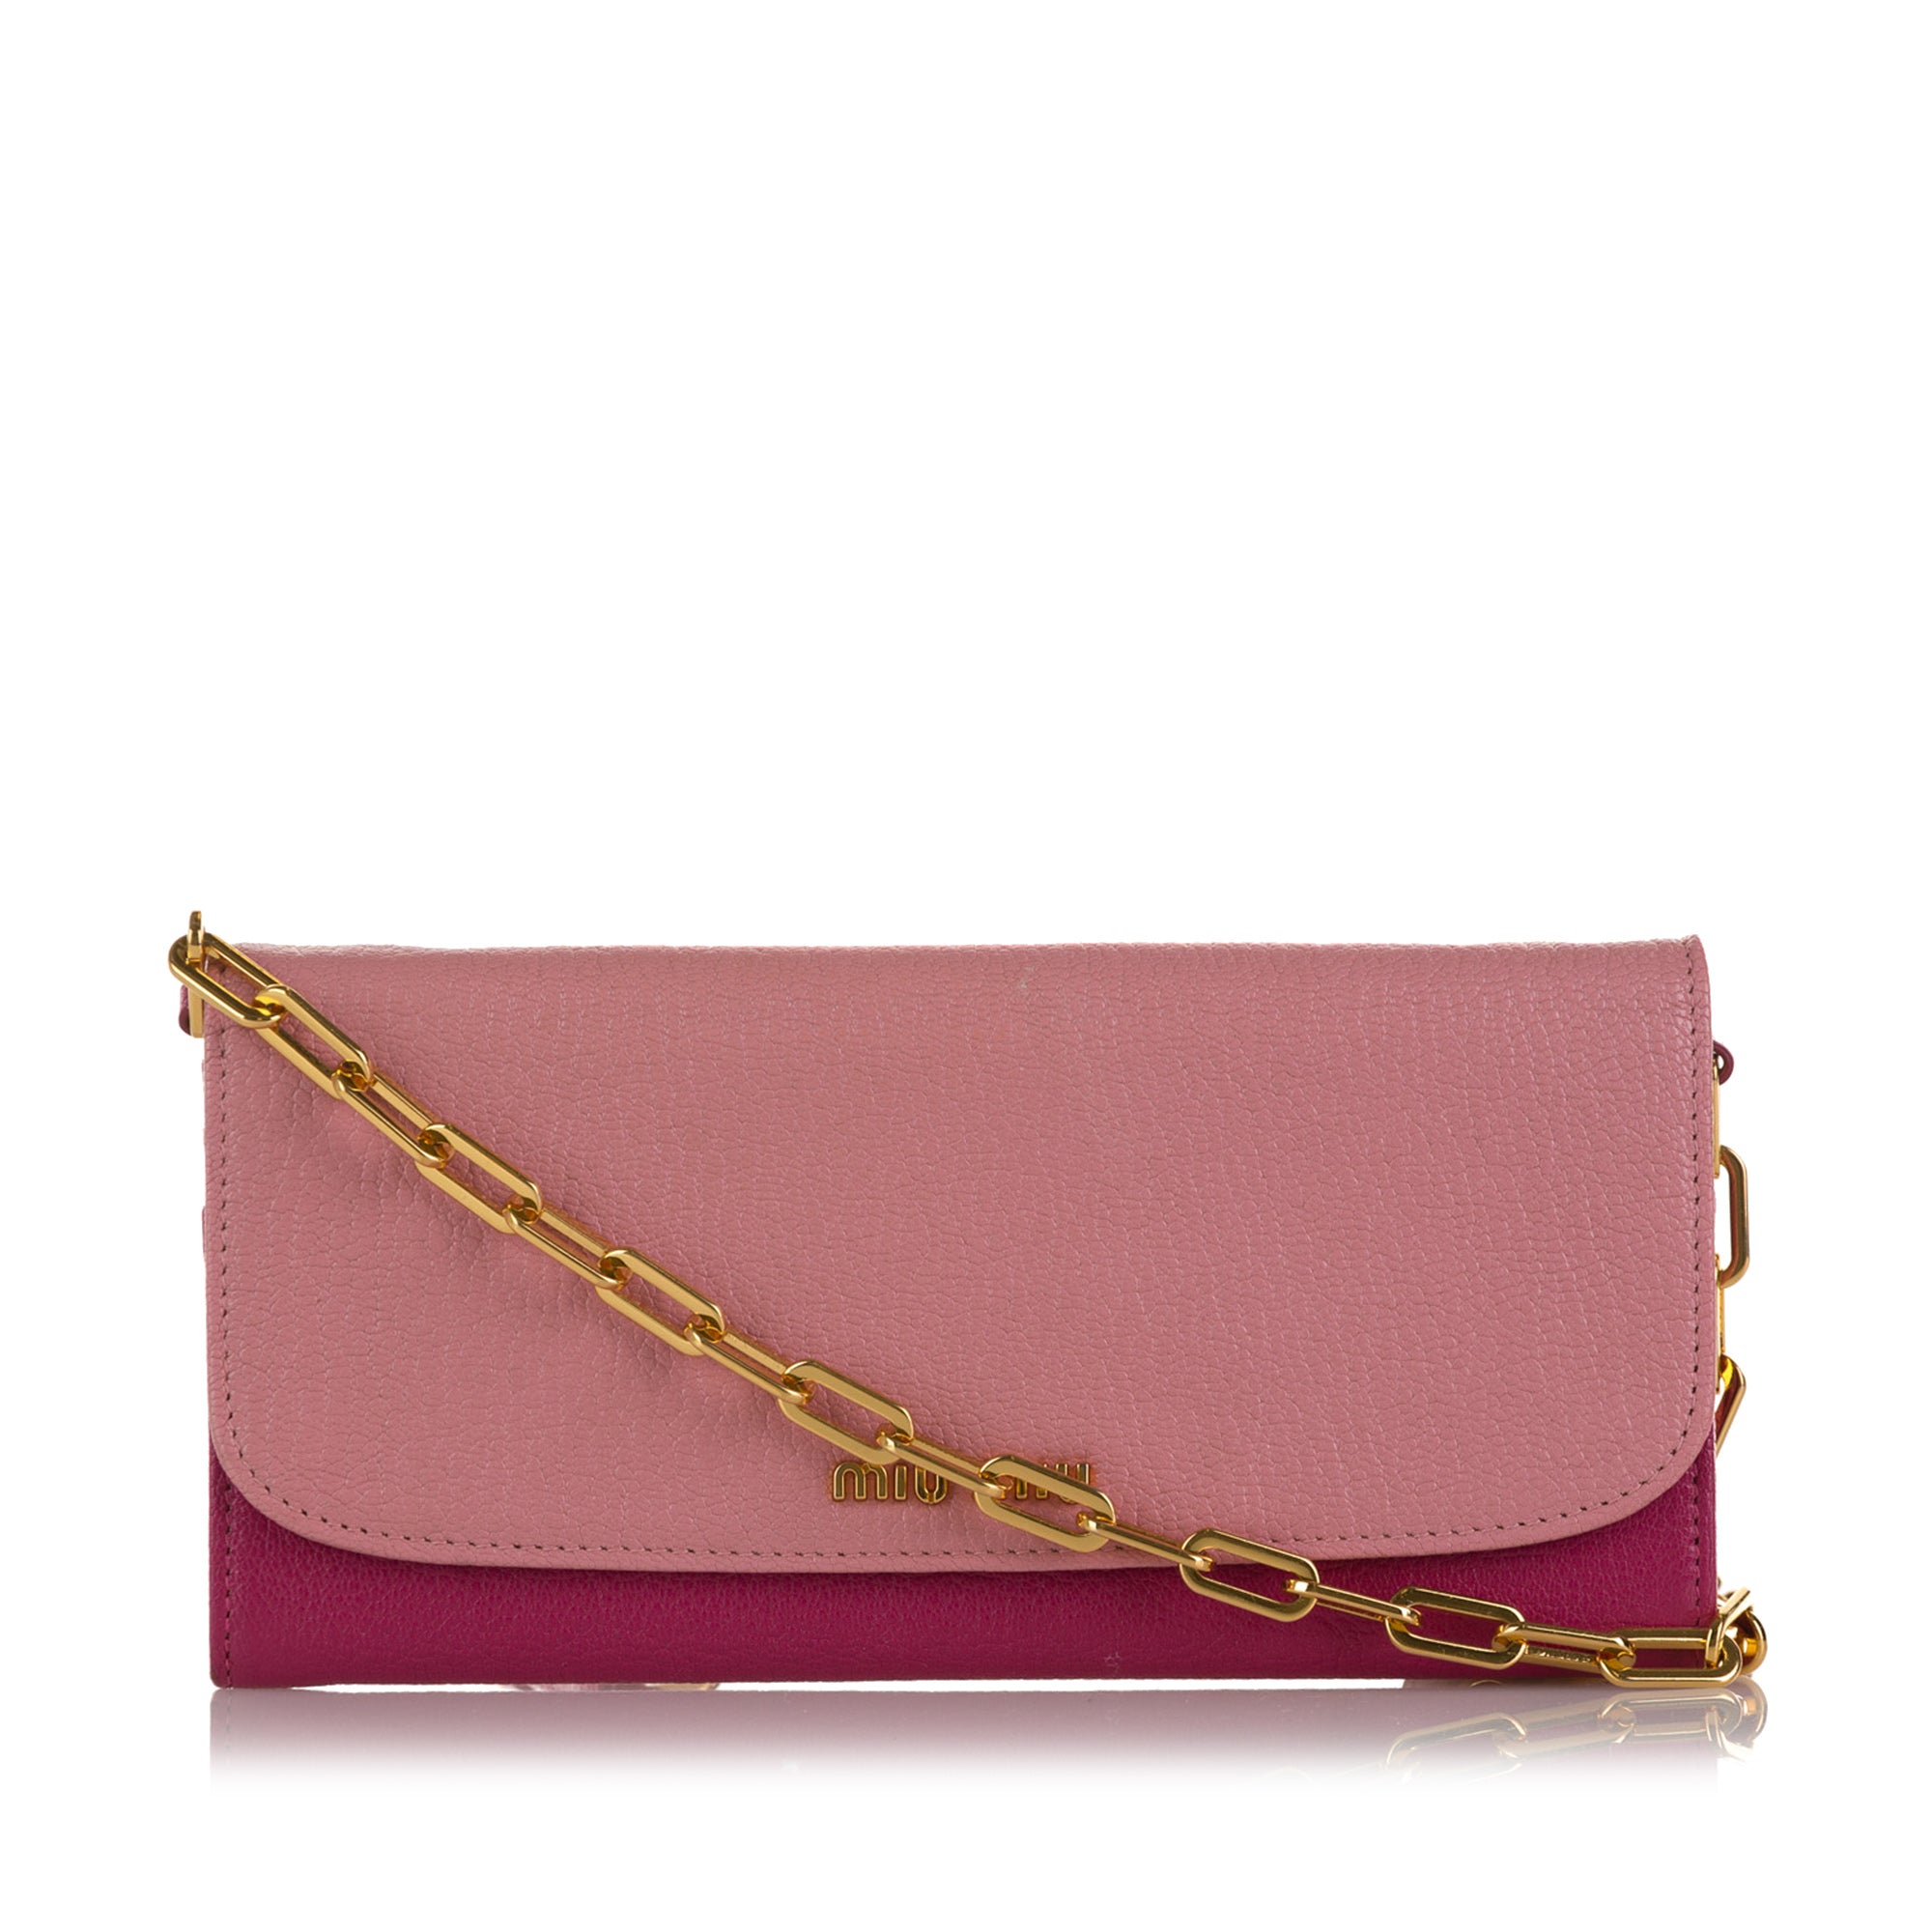 Pink Miu Miu Leather Wallet On Chain Crossbody Bag - Atelier-lumieresShops Revival